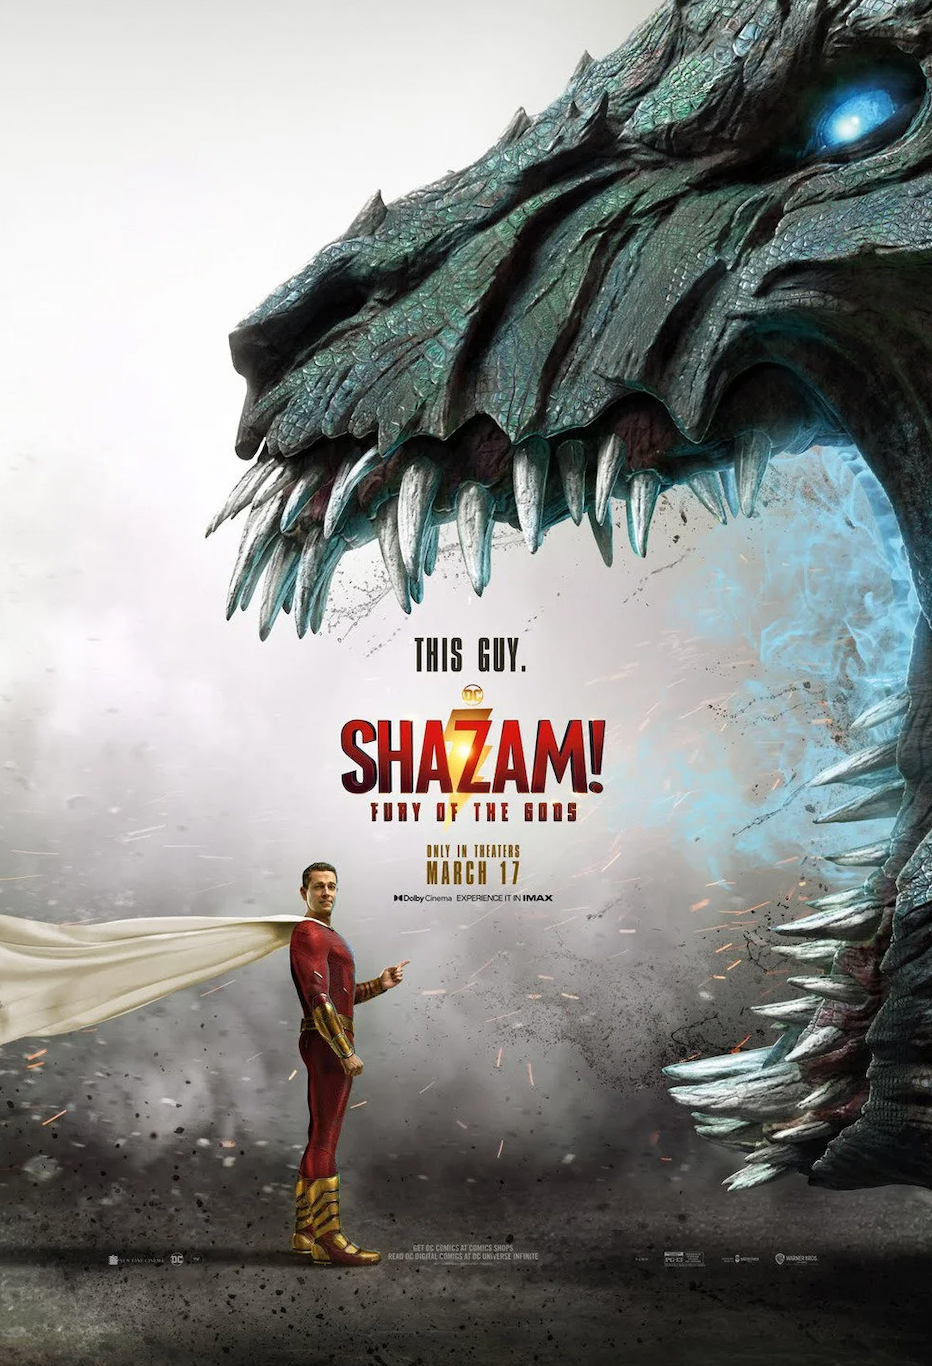 Prime revealed the digital release date for Shazam: Fury of